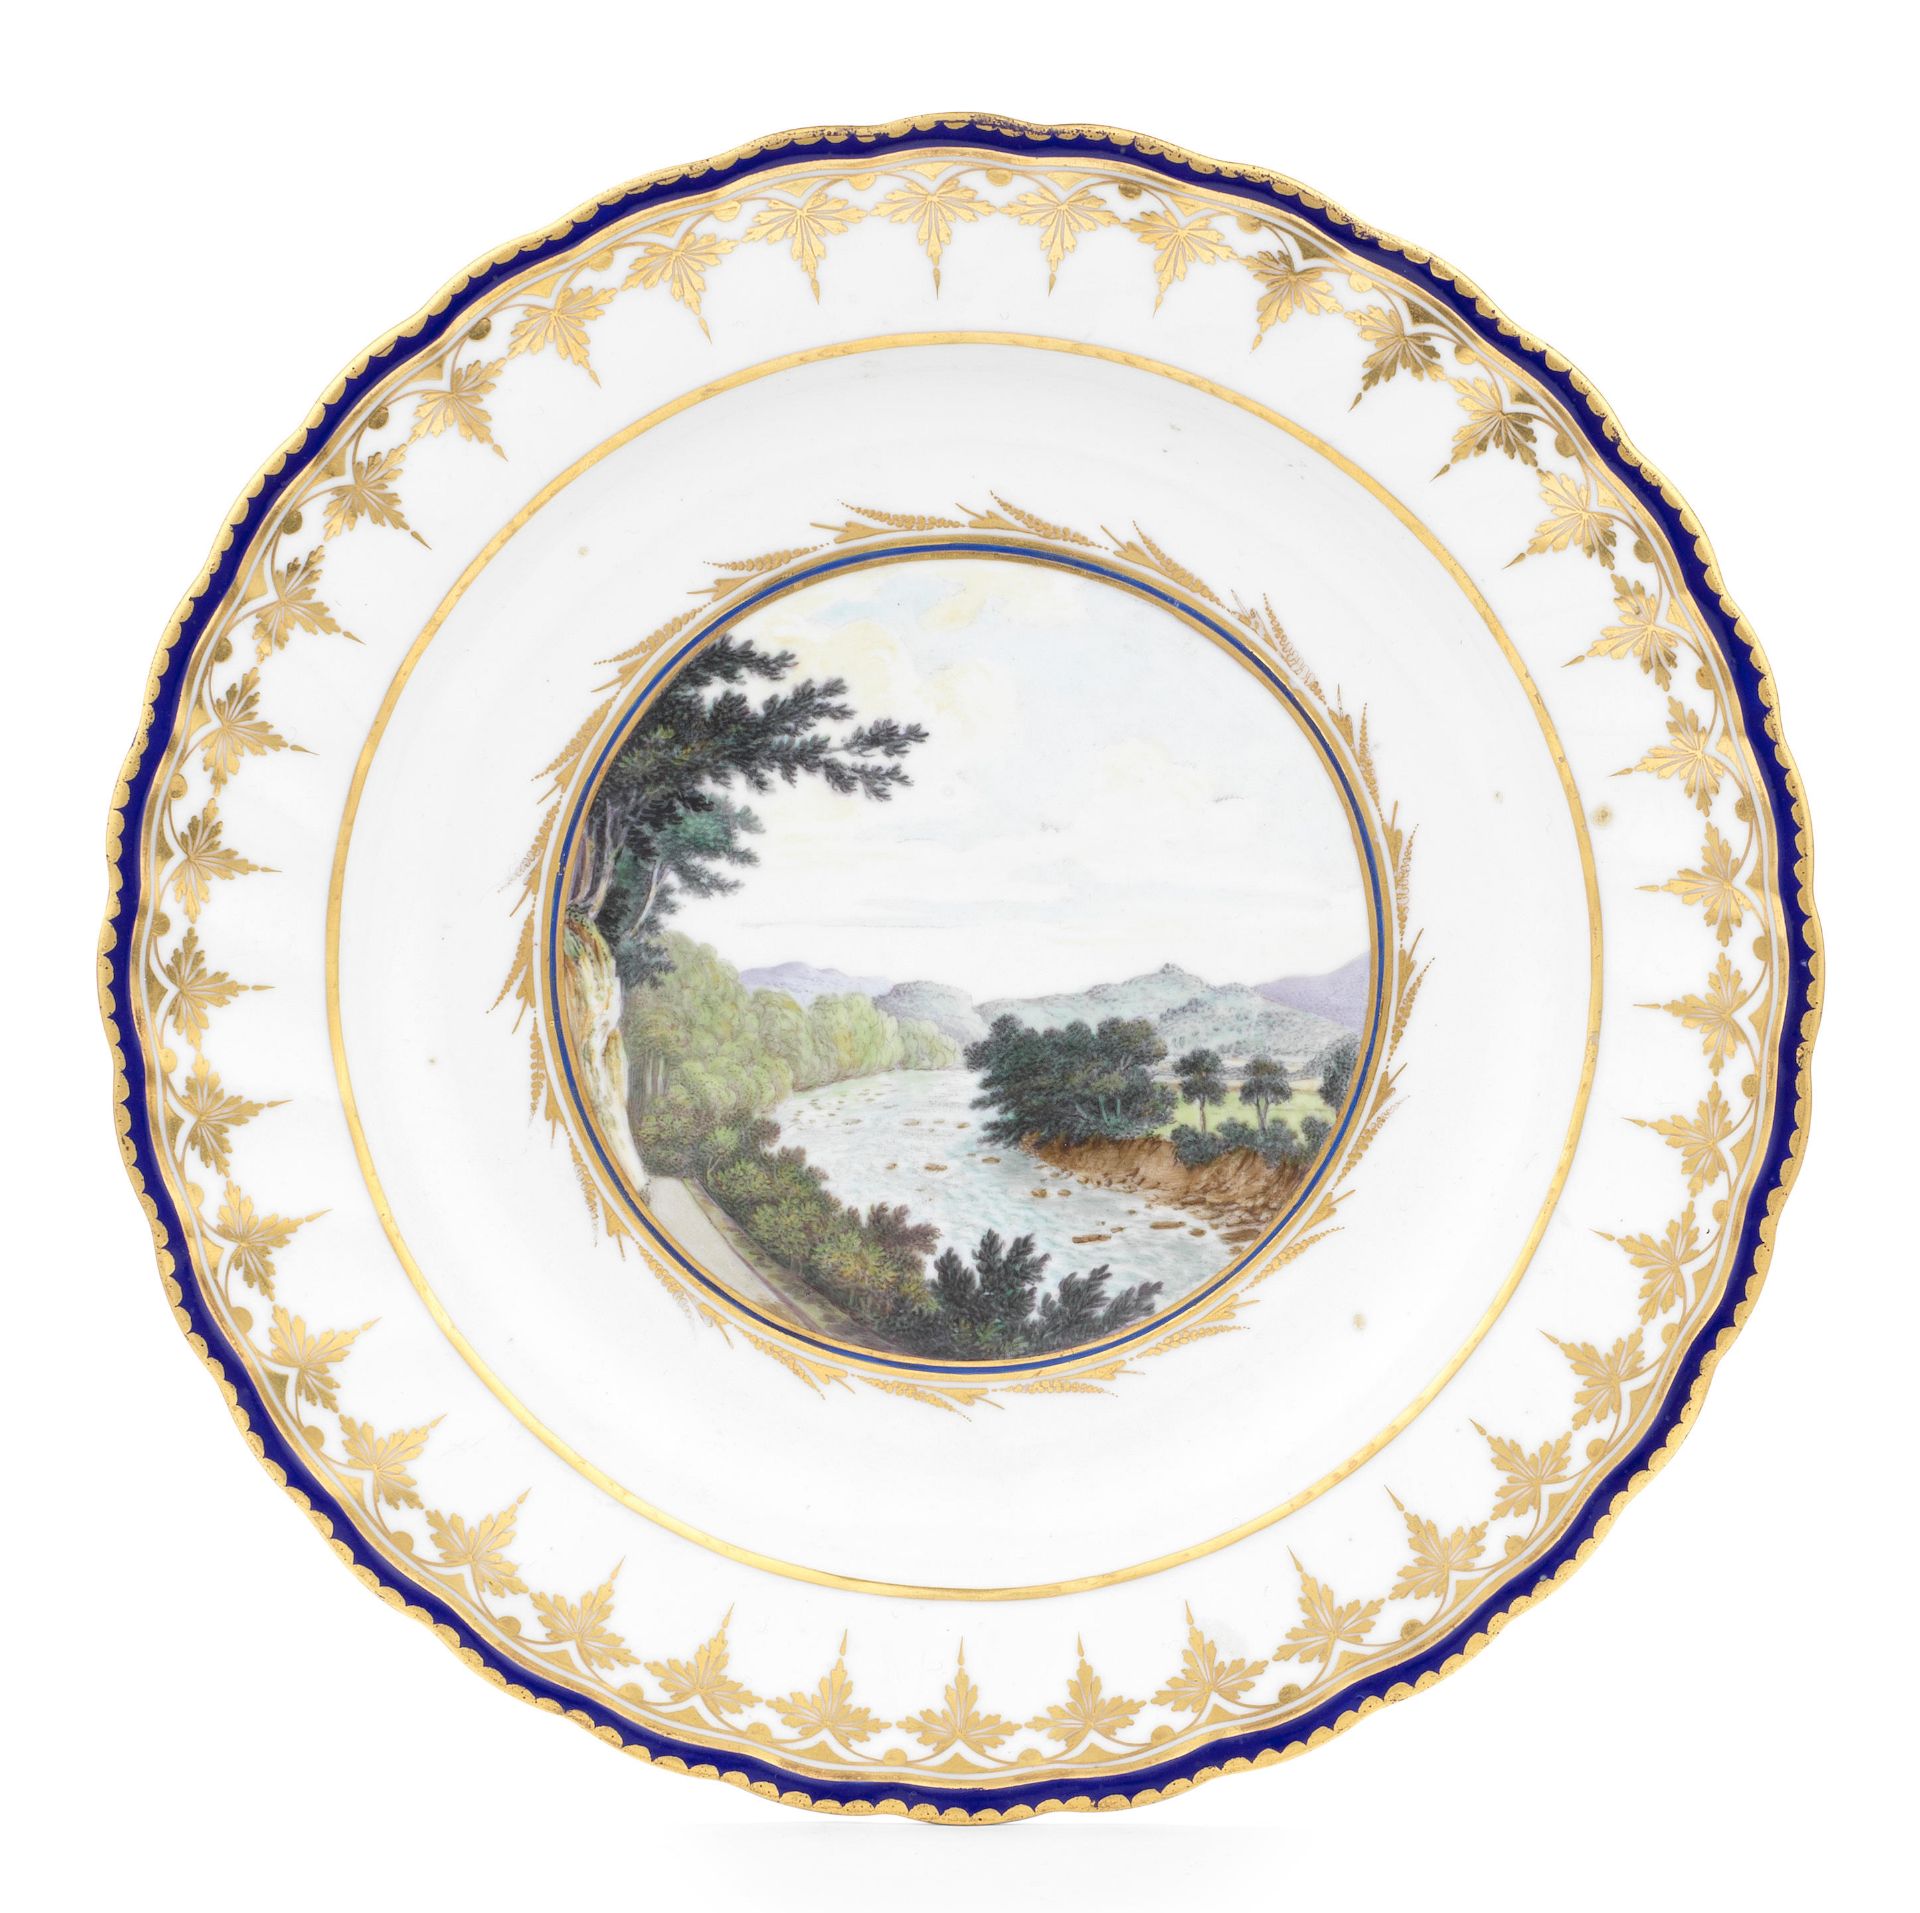 An important Derby plate from the Hafod Service, circa 1788